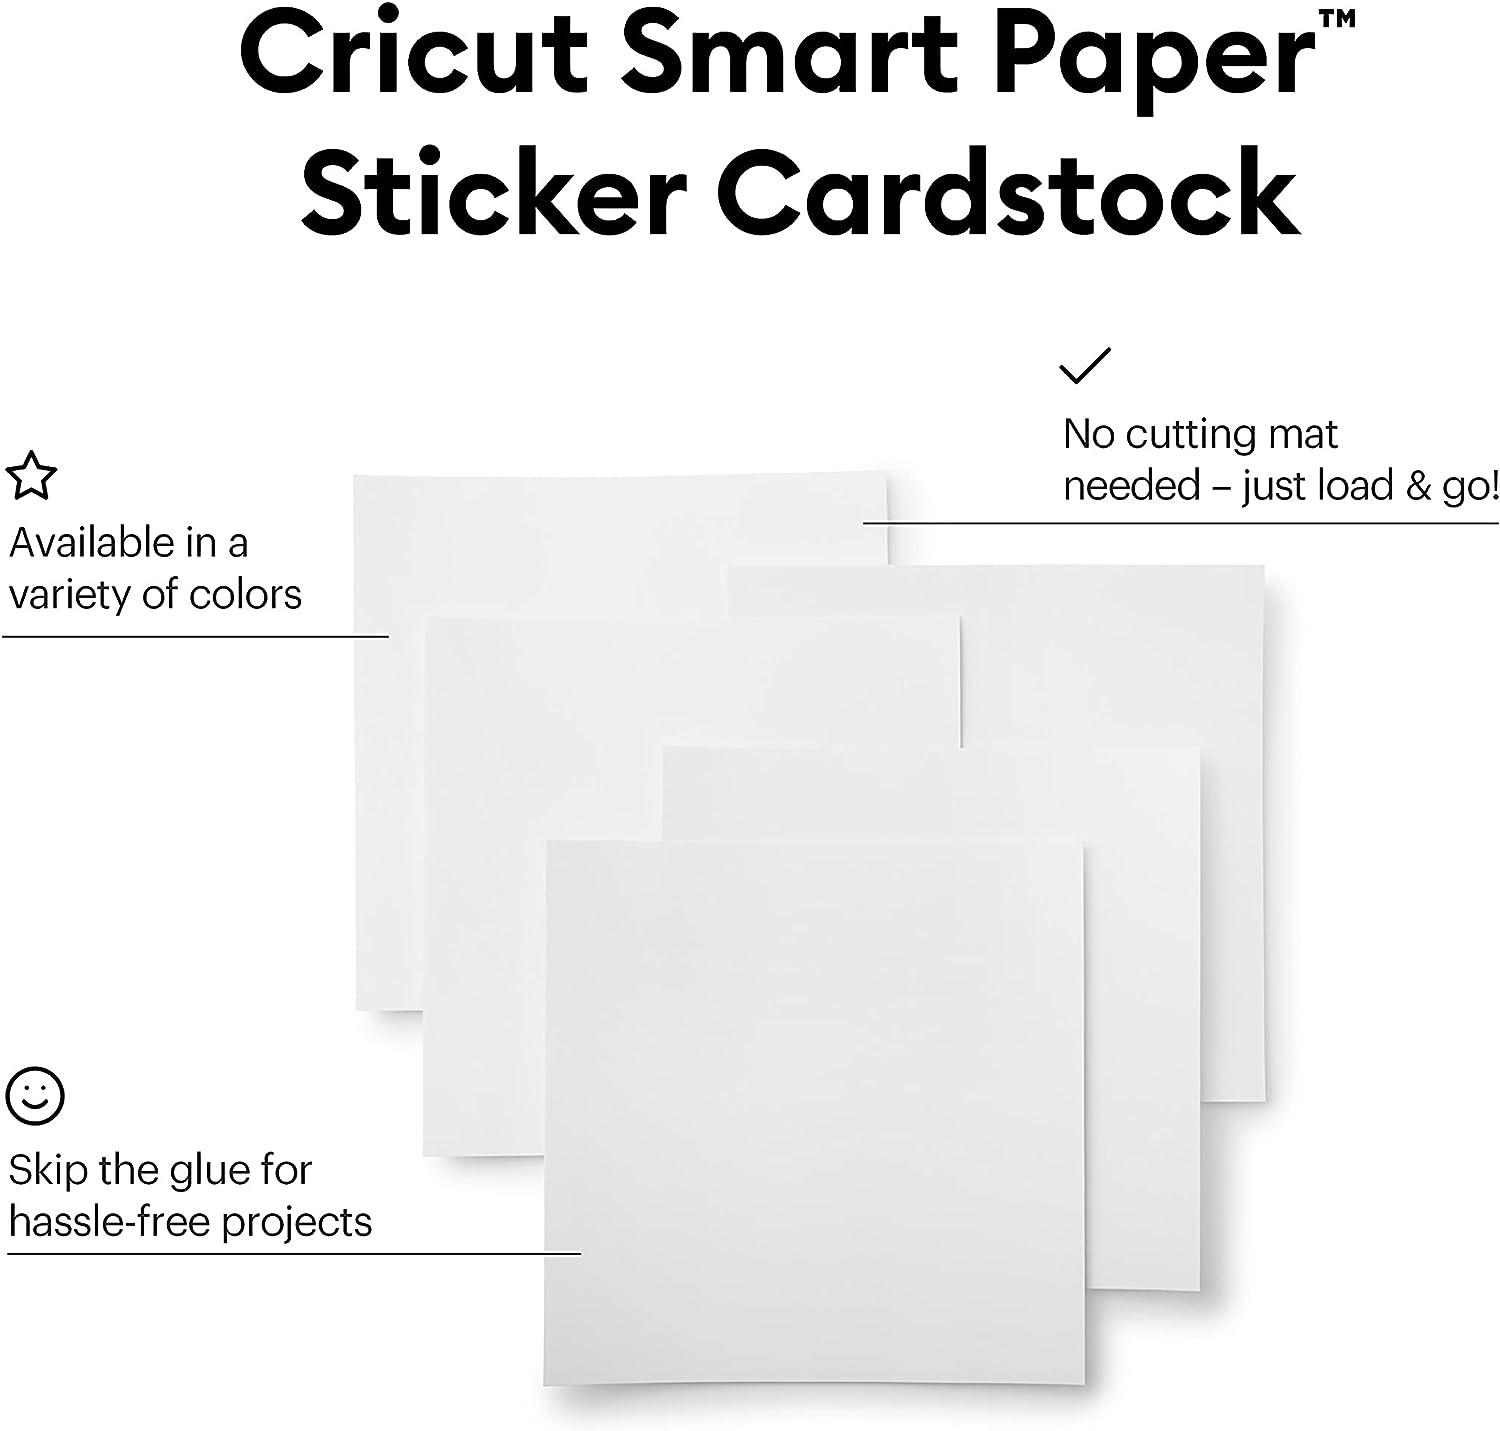 Cricut Smart Paper Sticker Cardstock - 10 Sheets - 13in x 13in - Adhesive  Paper for Stickers - Compatible with Cricut Explore 3/Maker 3 - White